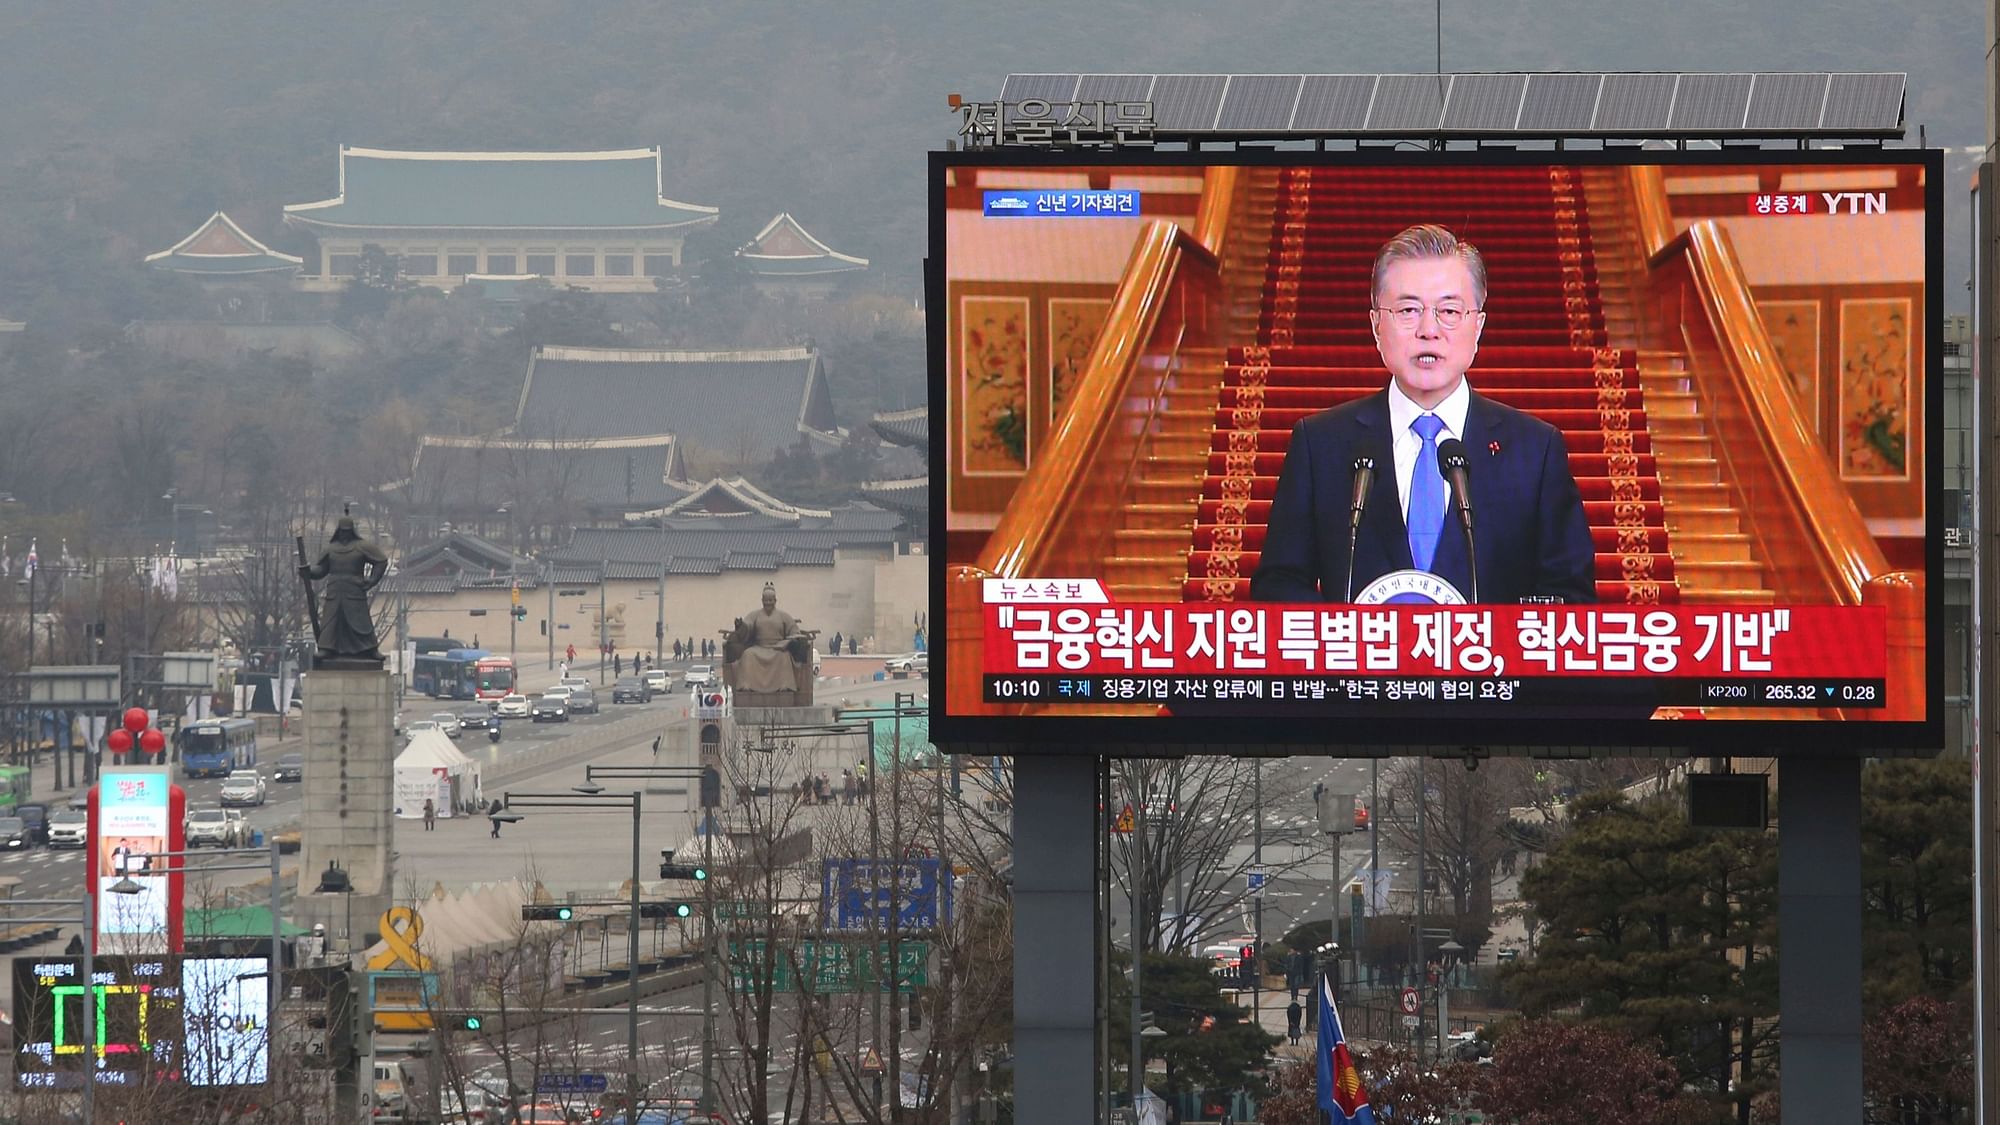 A TV screen shows the live broadcast of South Korean President Moon Jae-in’s press conference in Seoul, South Korea, Thursday, 10 January 2019.&nbsp;